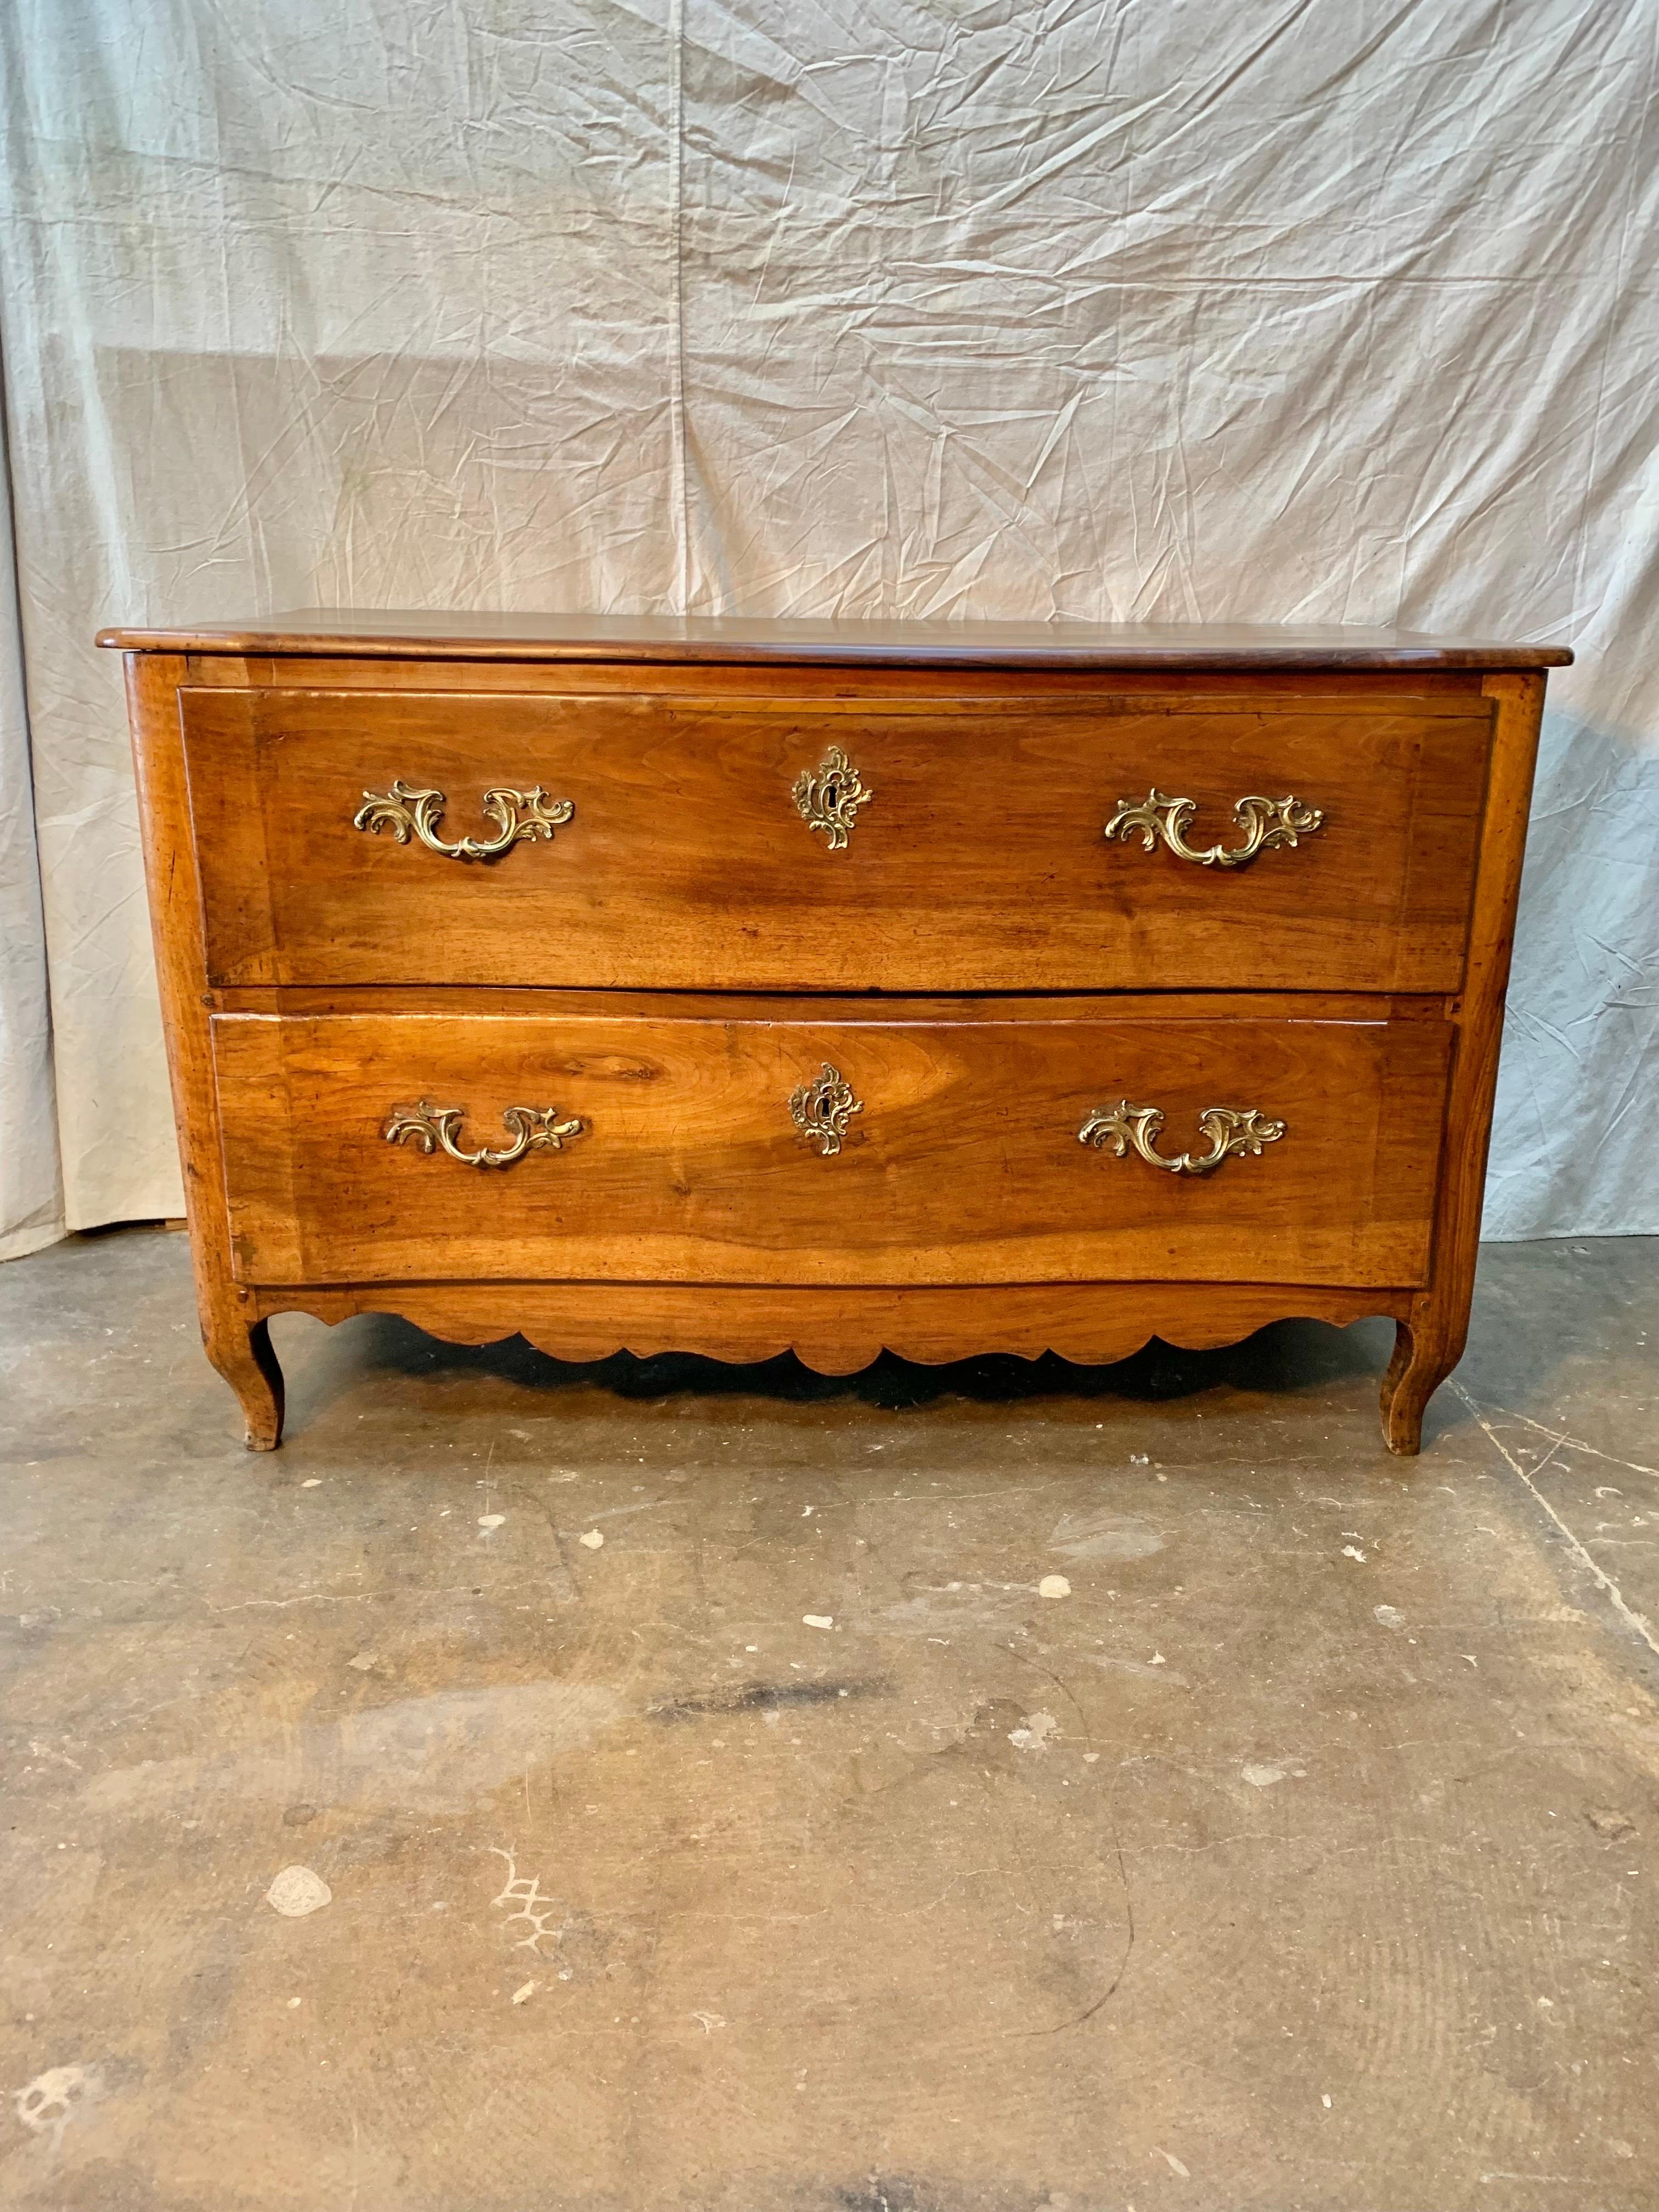 Found in the South of France, this Late 1700s French Louis XV Chest of Drawers was crafted by French artisans from old growth walnut.  The piece features a three planked top resting above two large hand dovetailed drawers.  Each drawer retains its